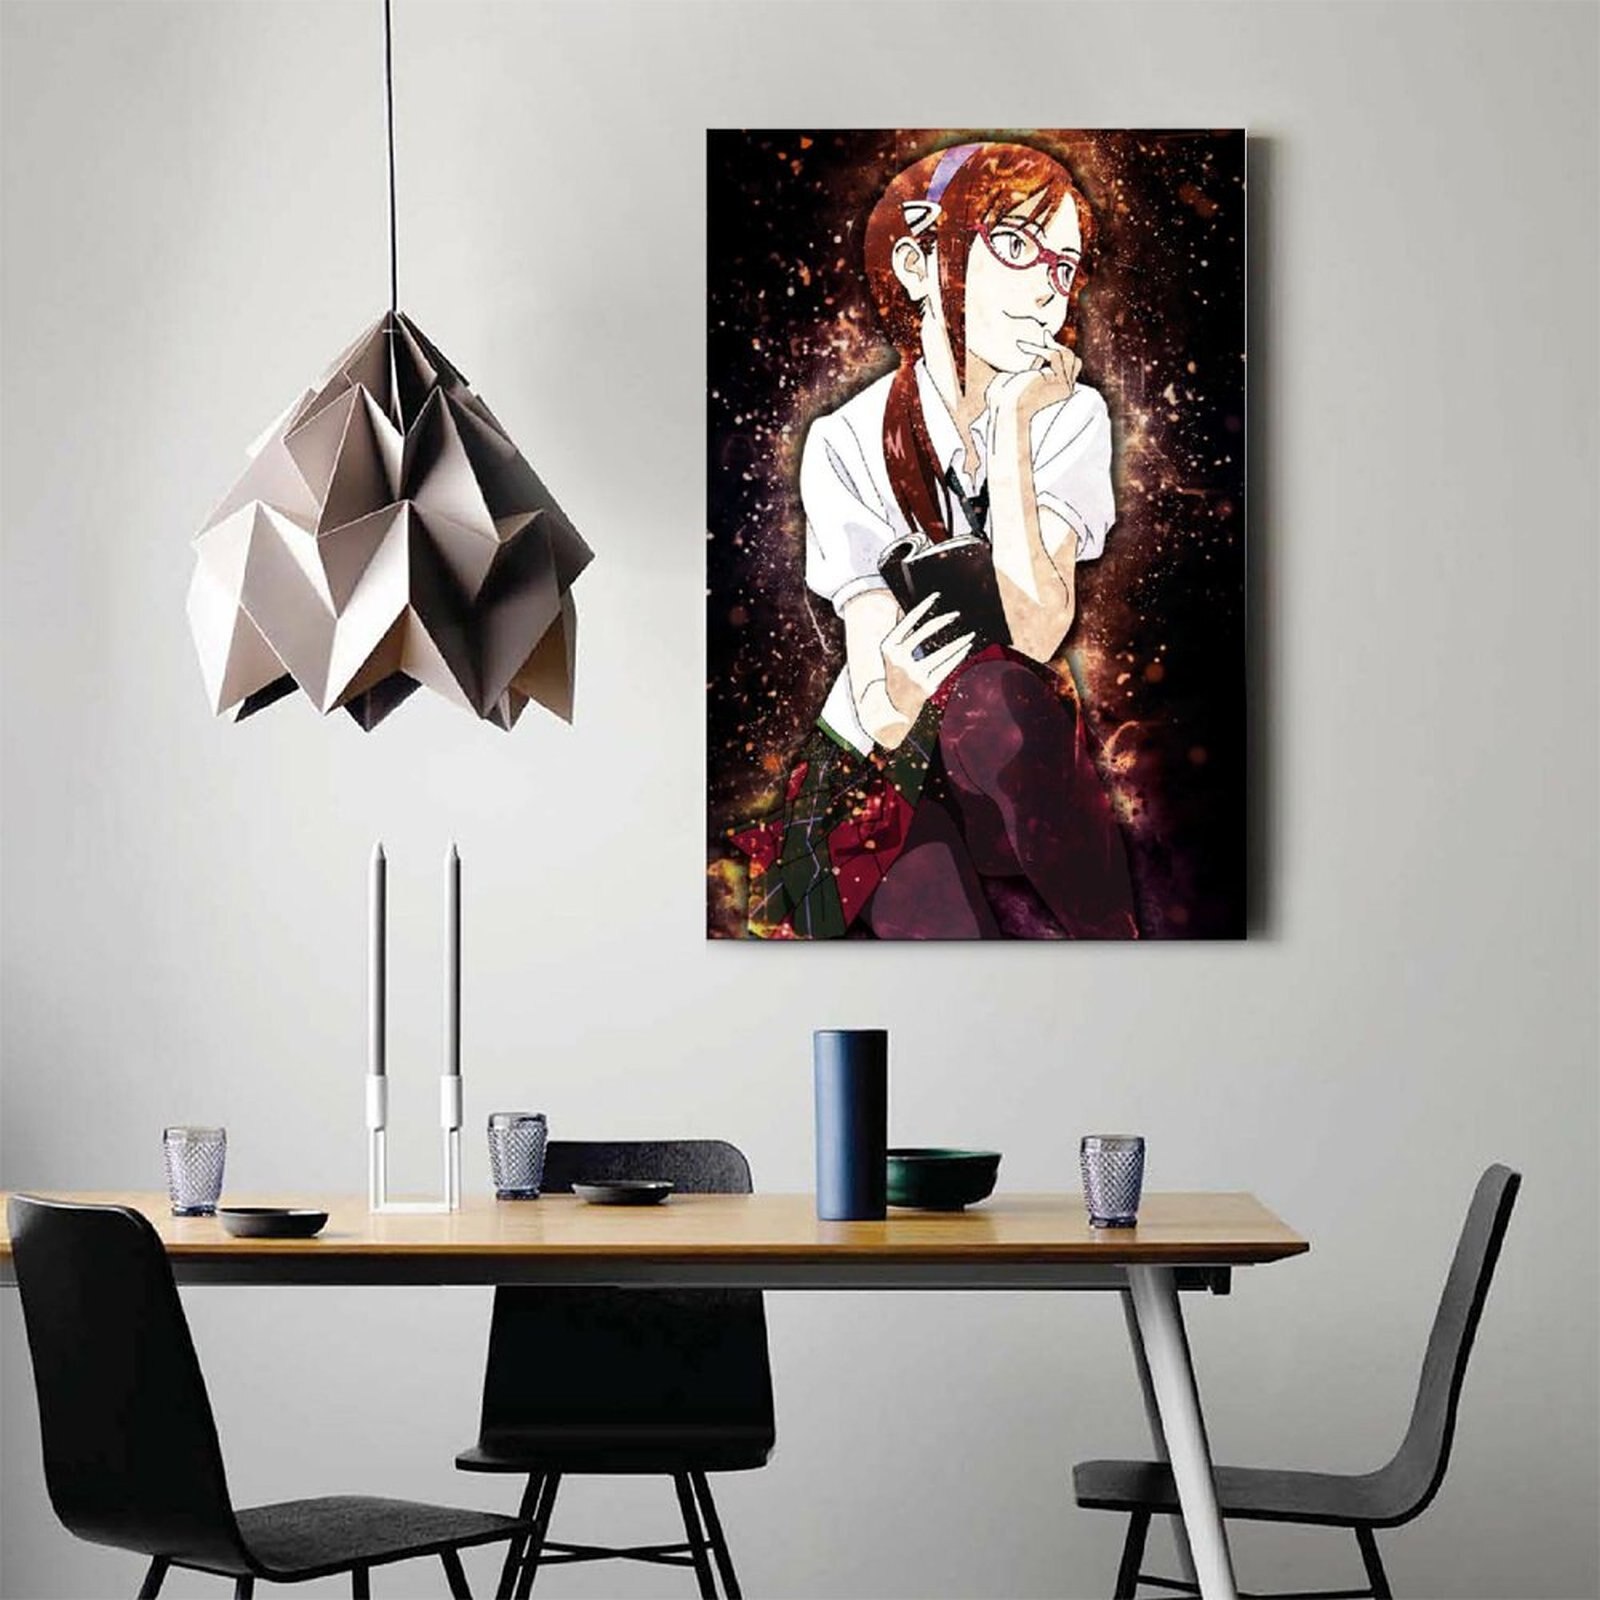 Anime Evangelion Makinami GirlCanvas Painting Wall Art Posters and Prints Wall Pictures for Living Room Decoration 2 - Evangelion Shop